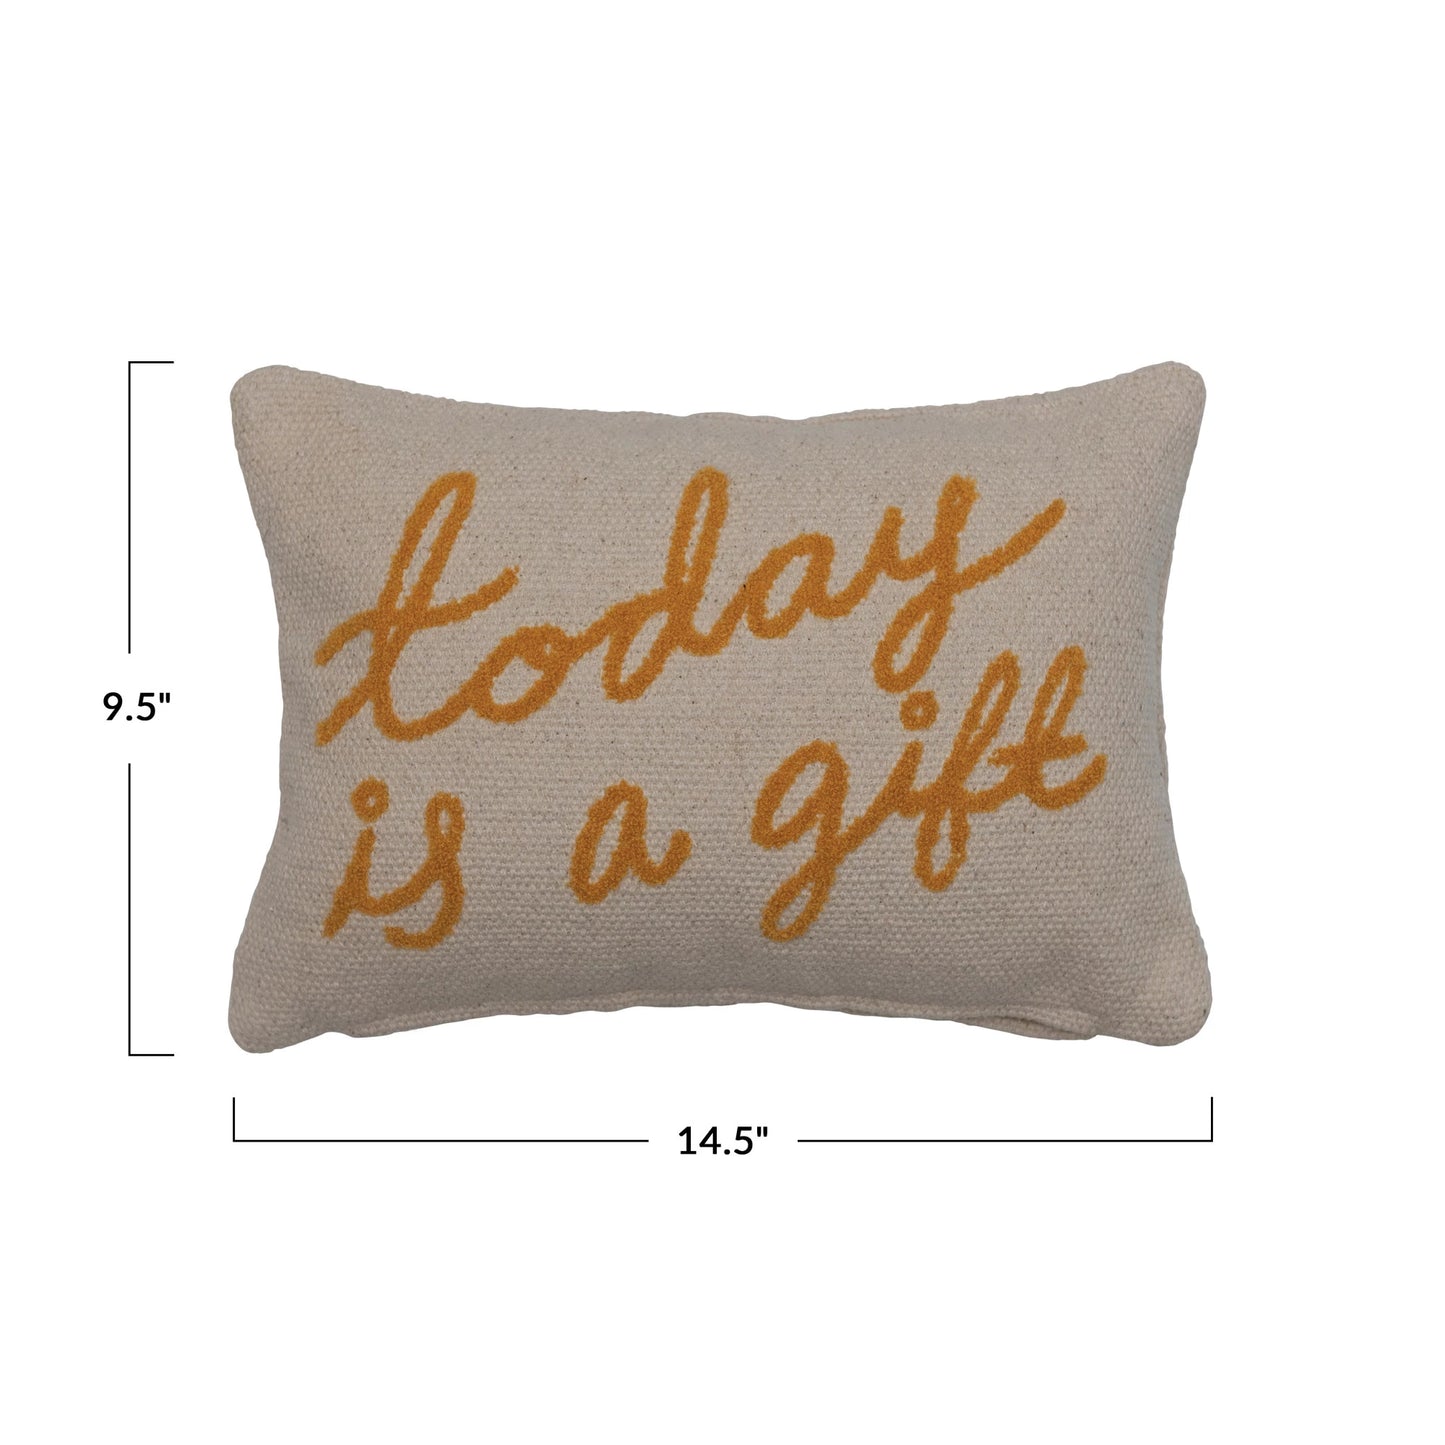 Today is a Gift Pillow